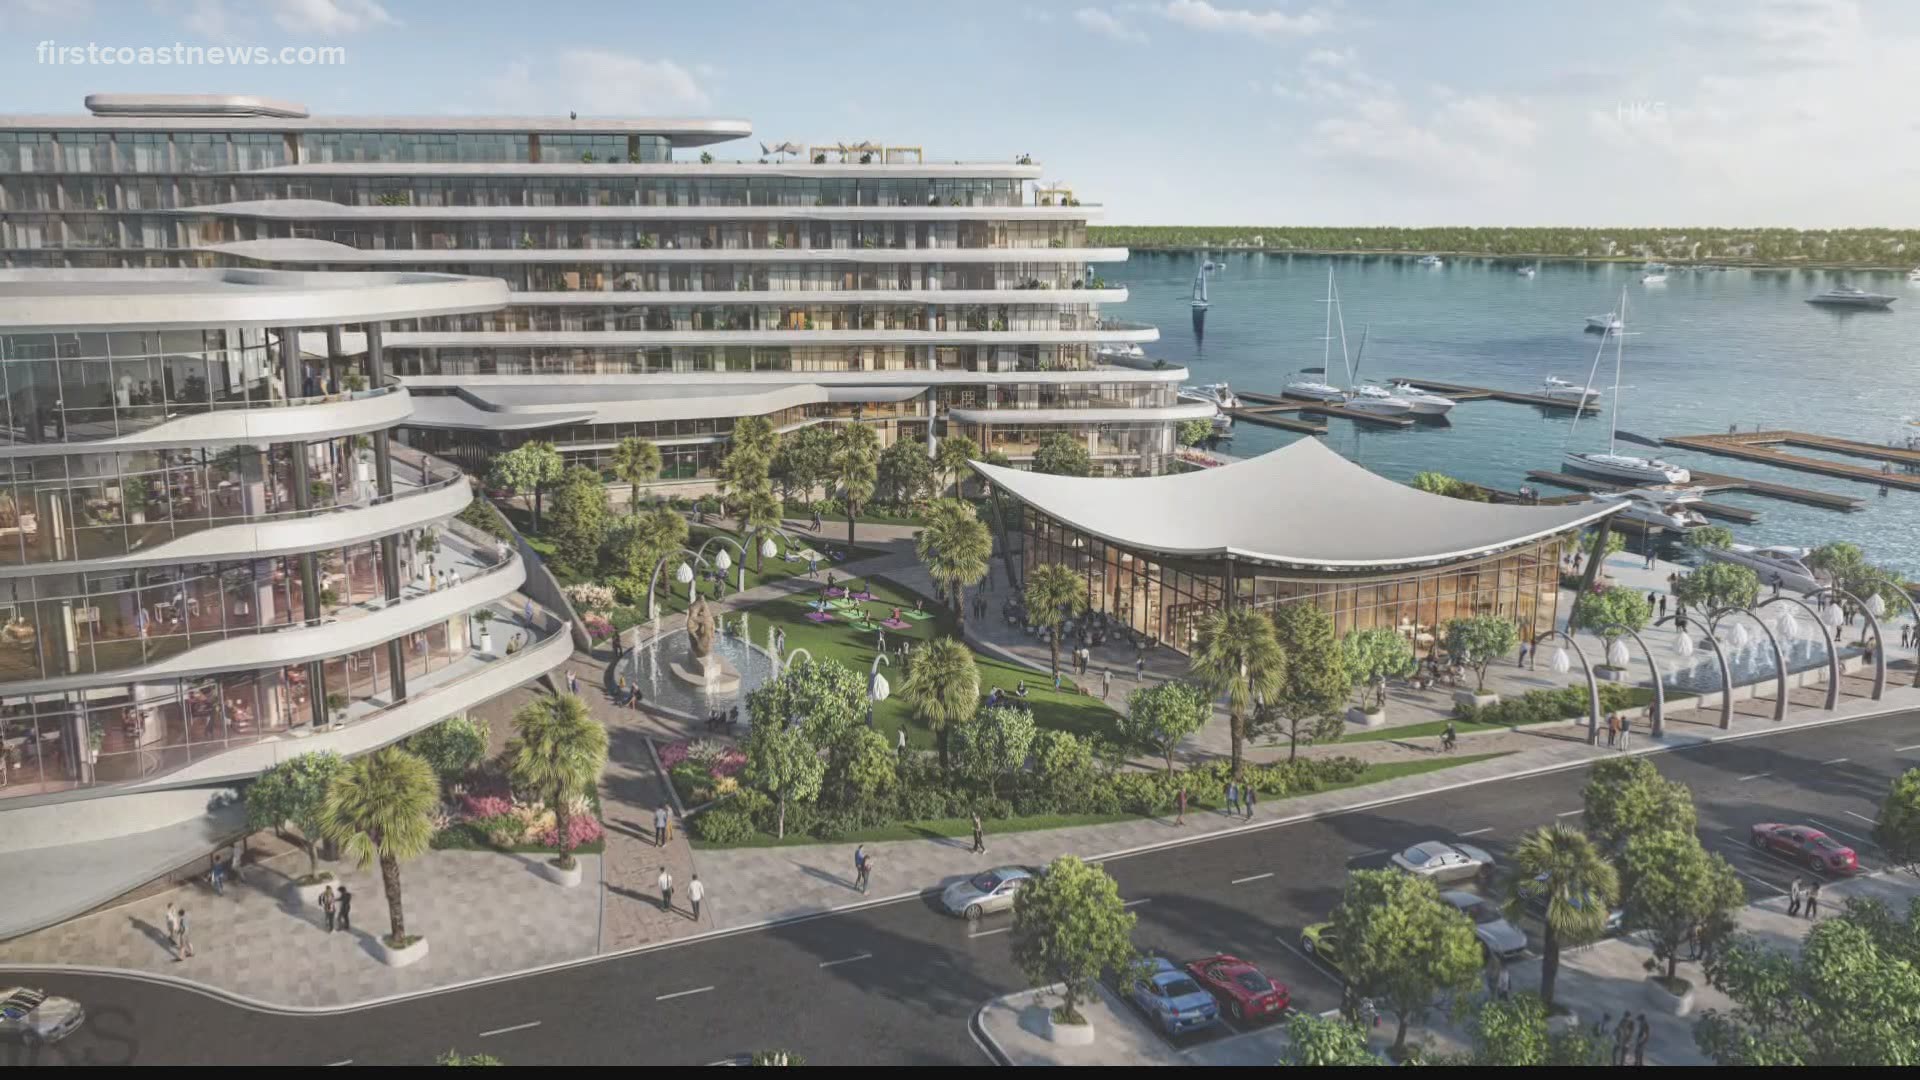 New football center, Four Seasons on the horizon for Downtown Jacksonville according to Jaguars